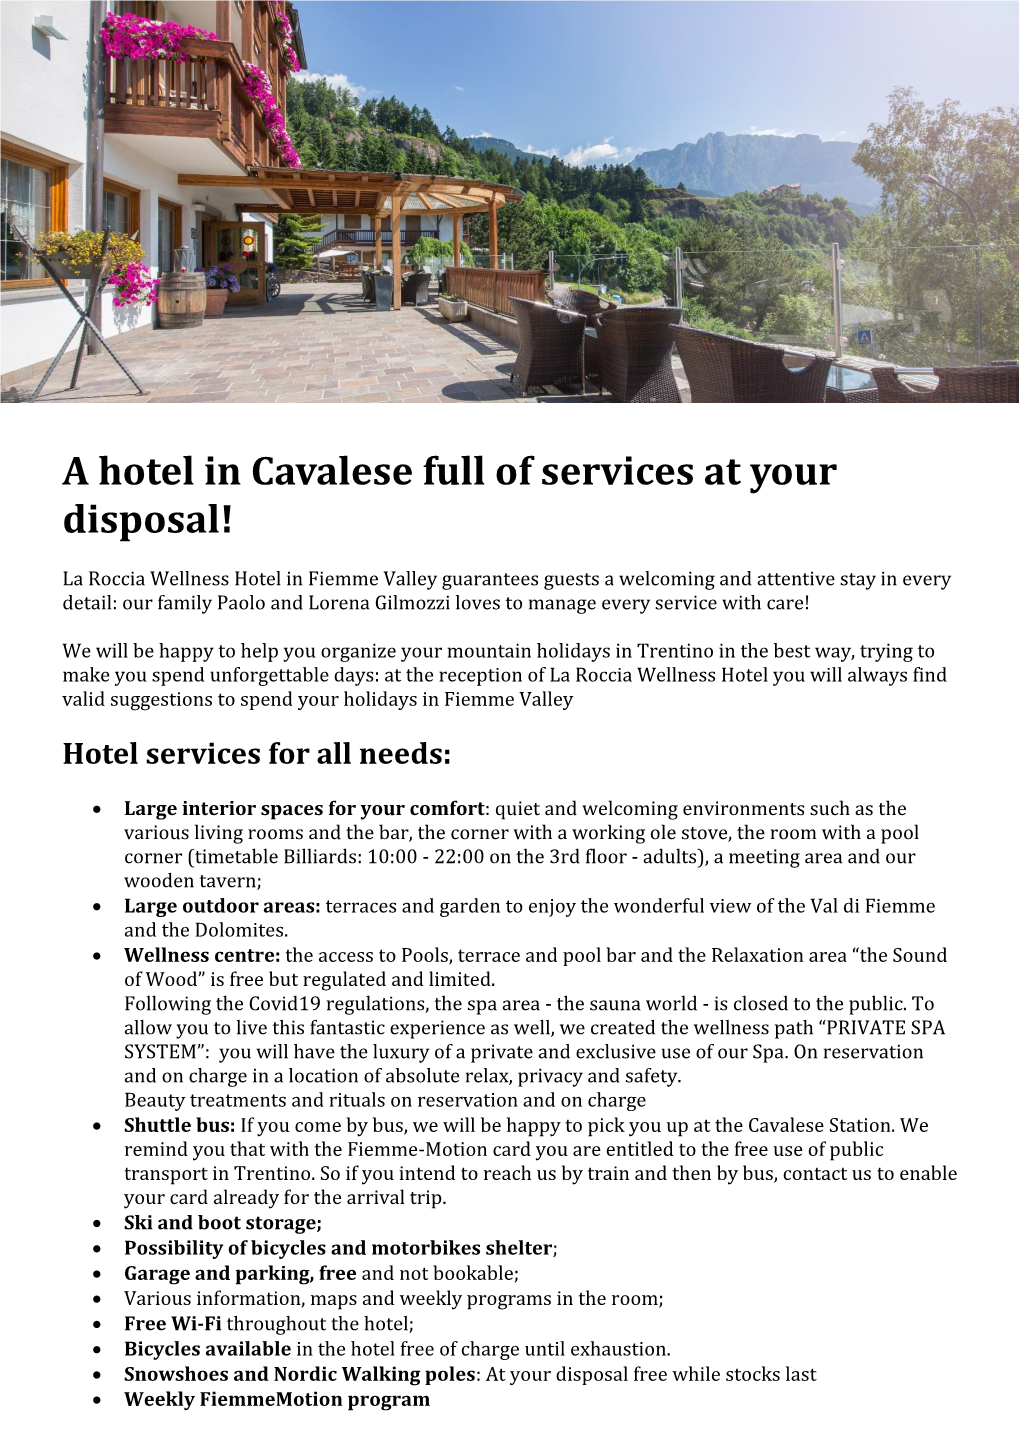 A Hotel in Cavalese Full of Services at Your Disposal!